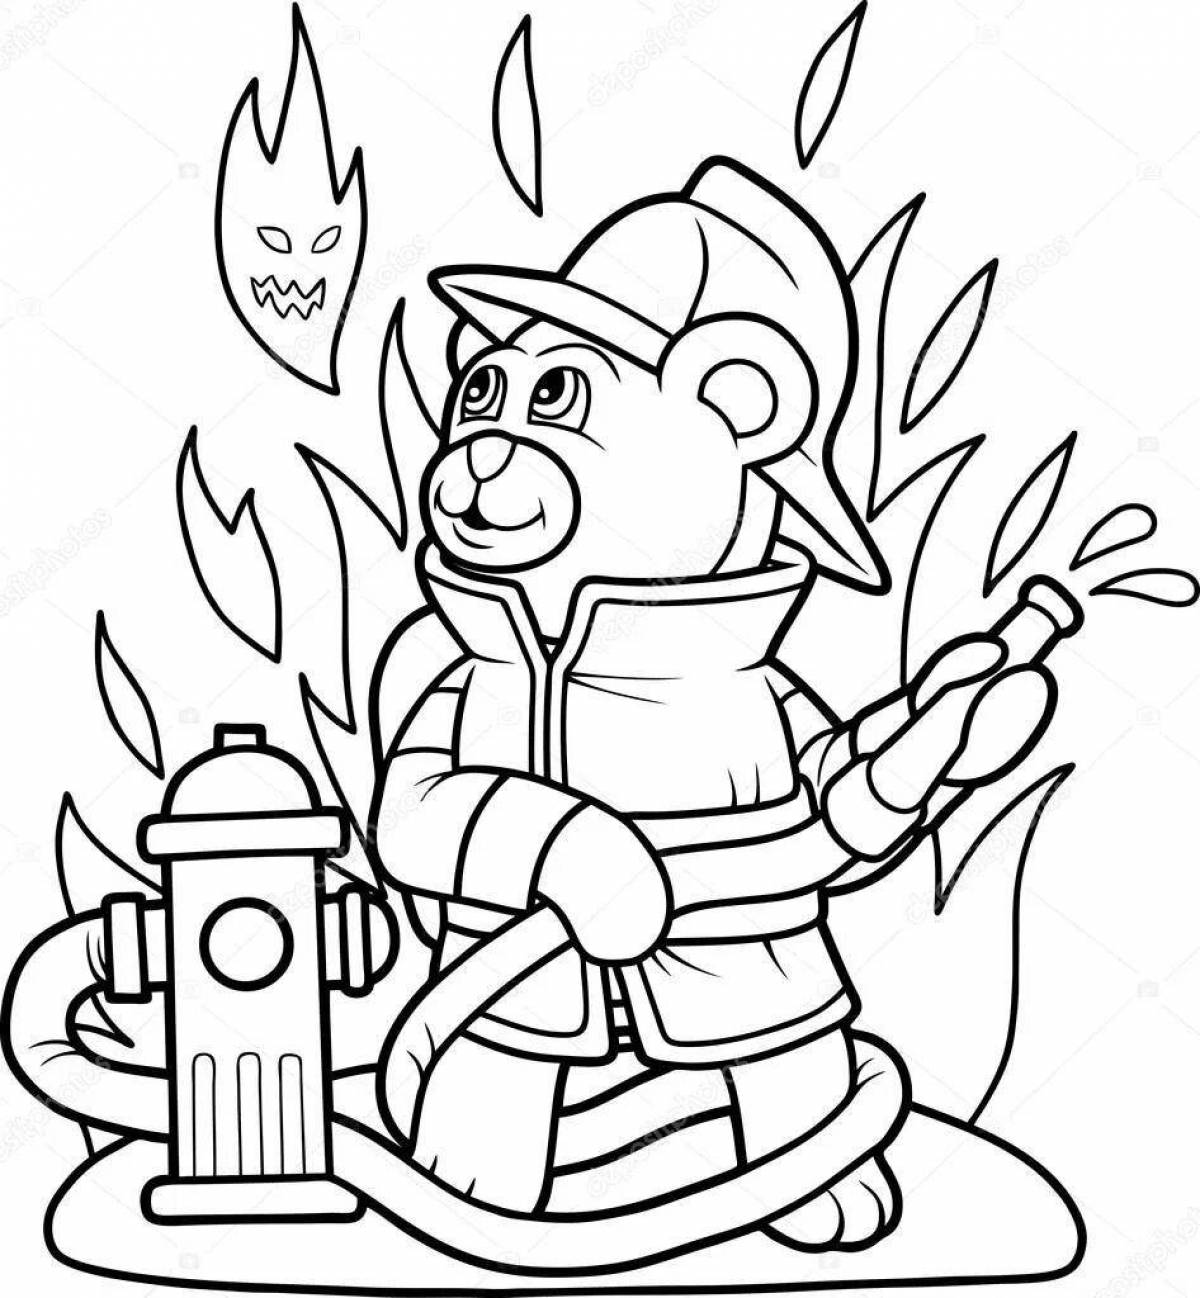 Fire fire safety coloring book for kindergarten